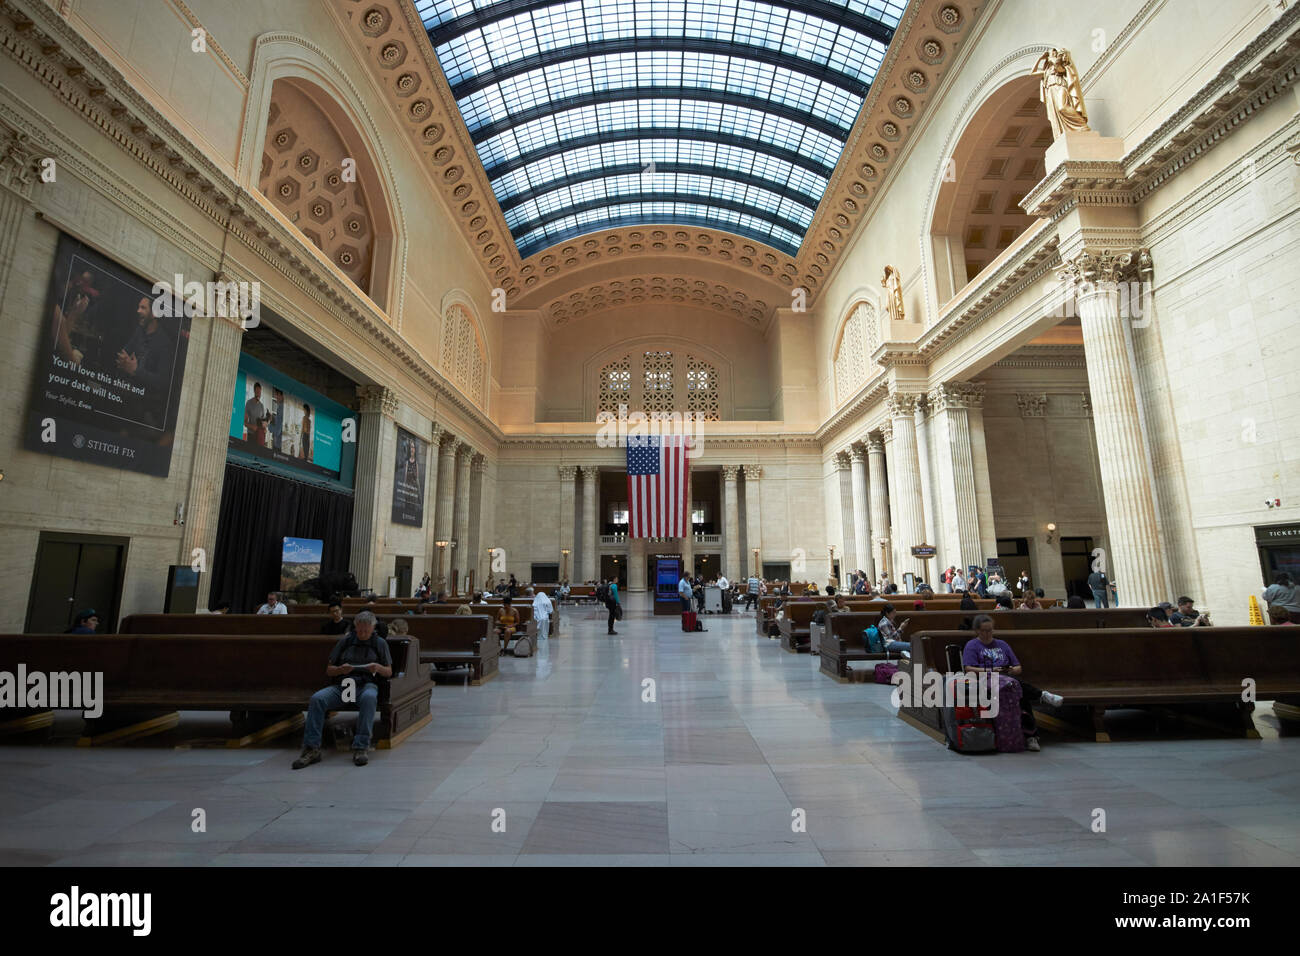 inside the great hall of union station chicago illinois united states of america Stock Photo